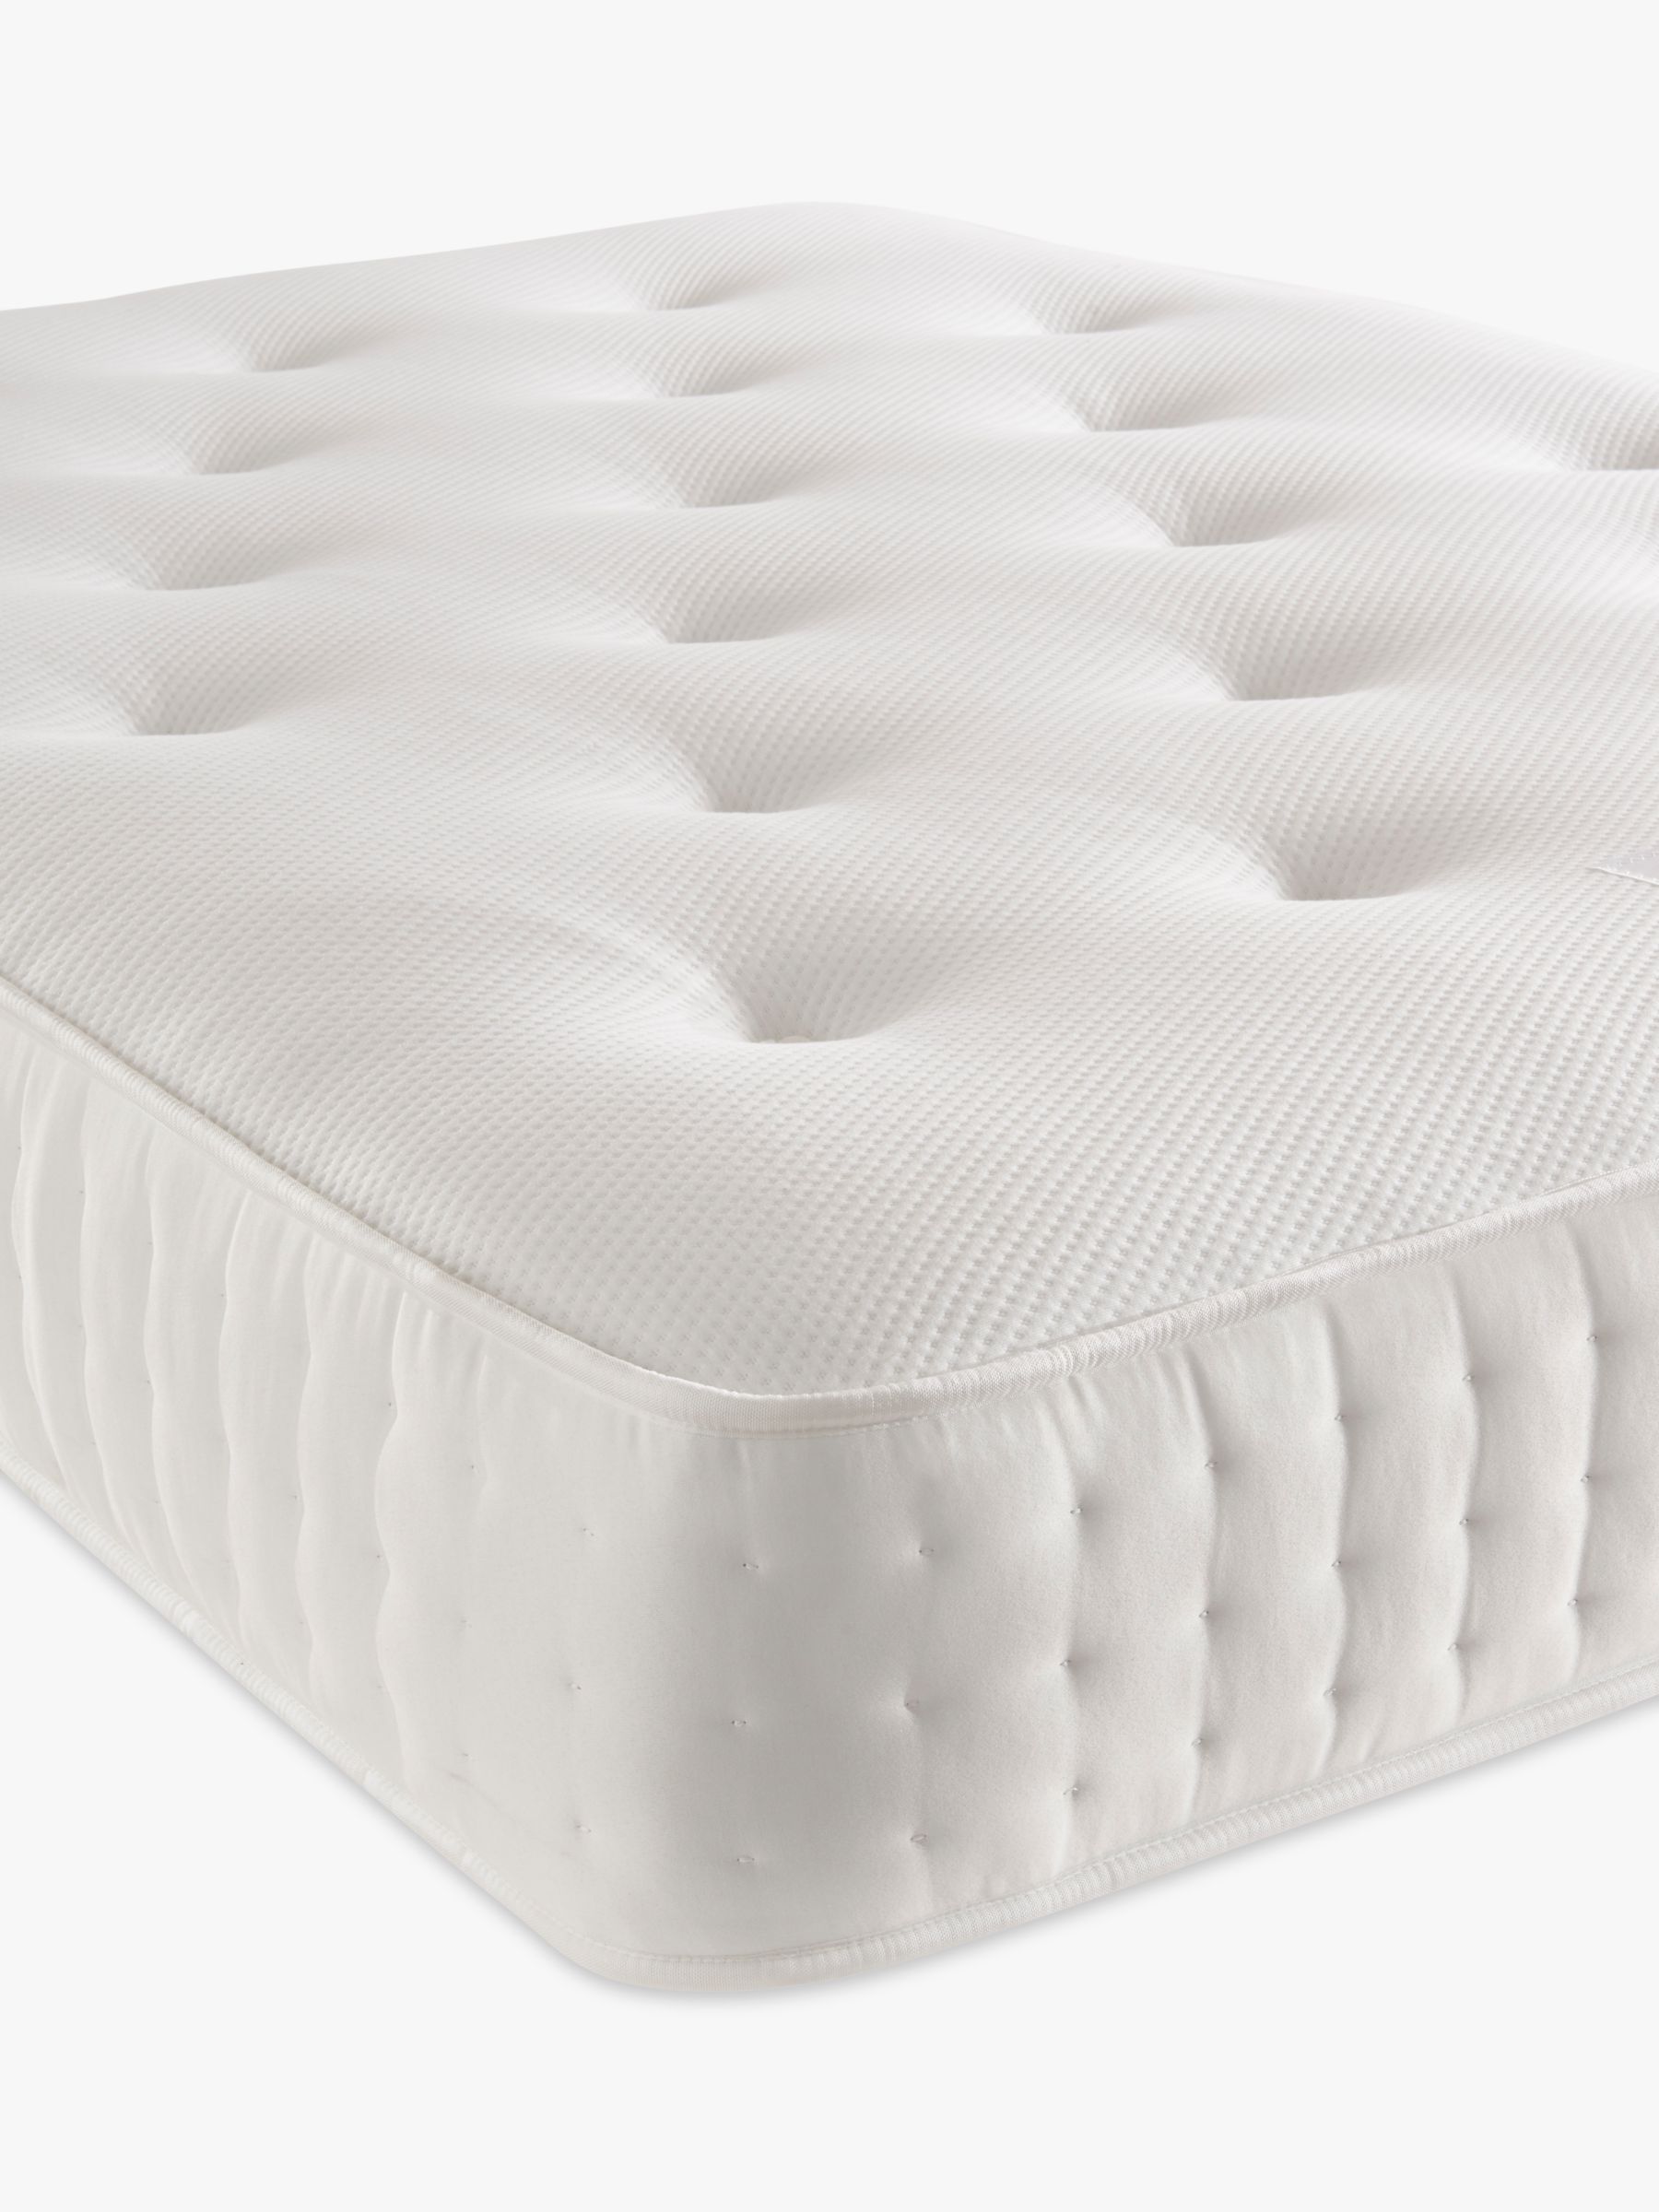 Photo of John lewis ortho support 1600 pocket spring mattress medium tension double